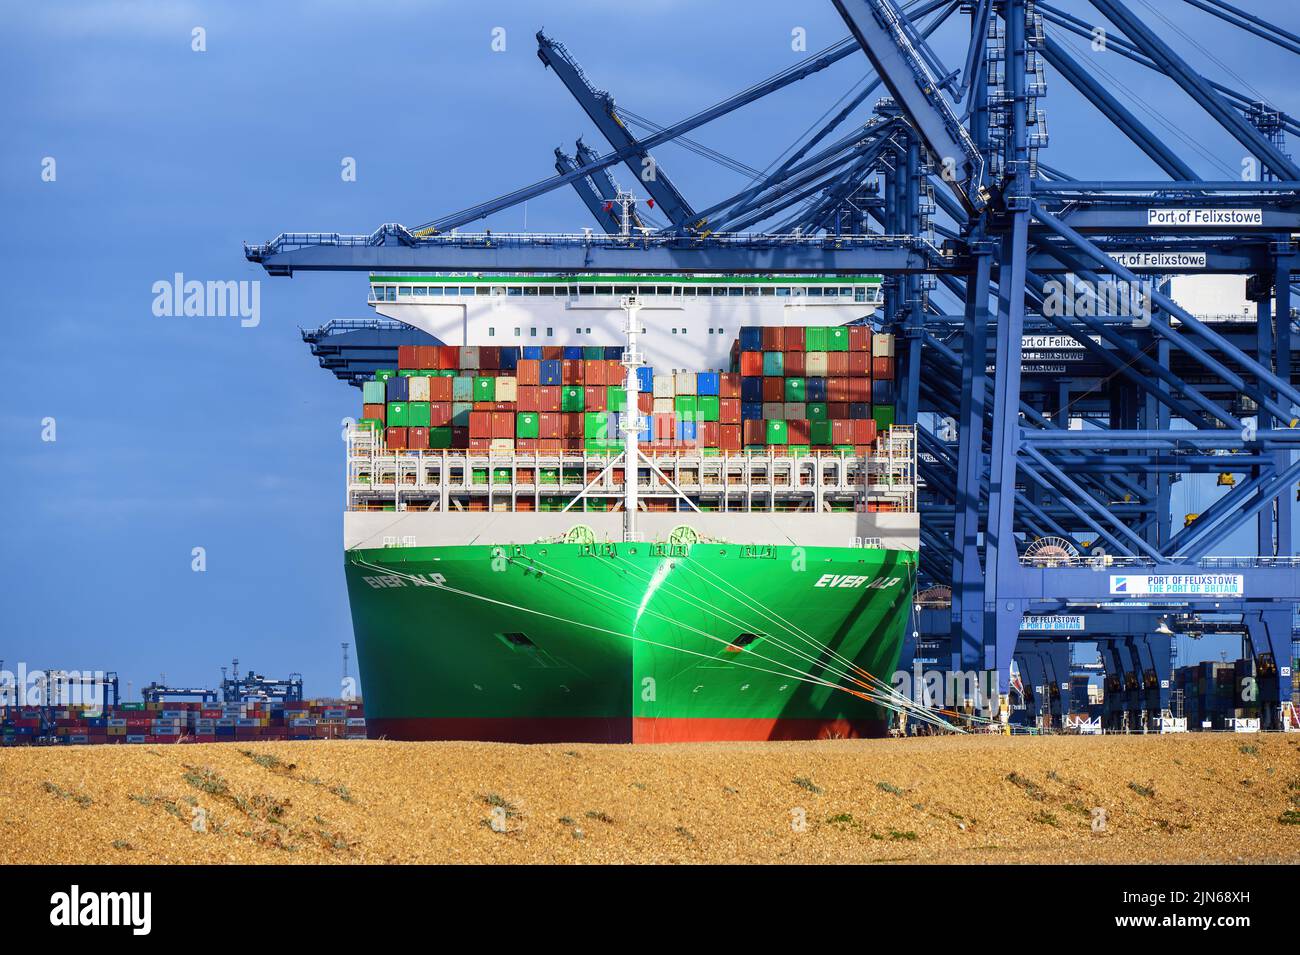 The ULCC container ship Ever Alp berthed at the Port of Felixstowe - January 2022. Stock Photo